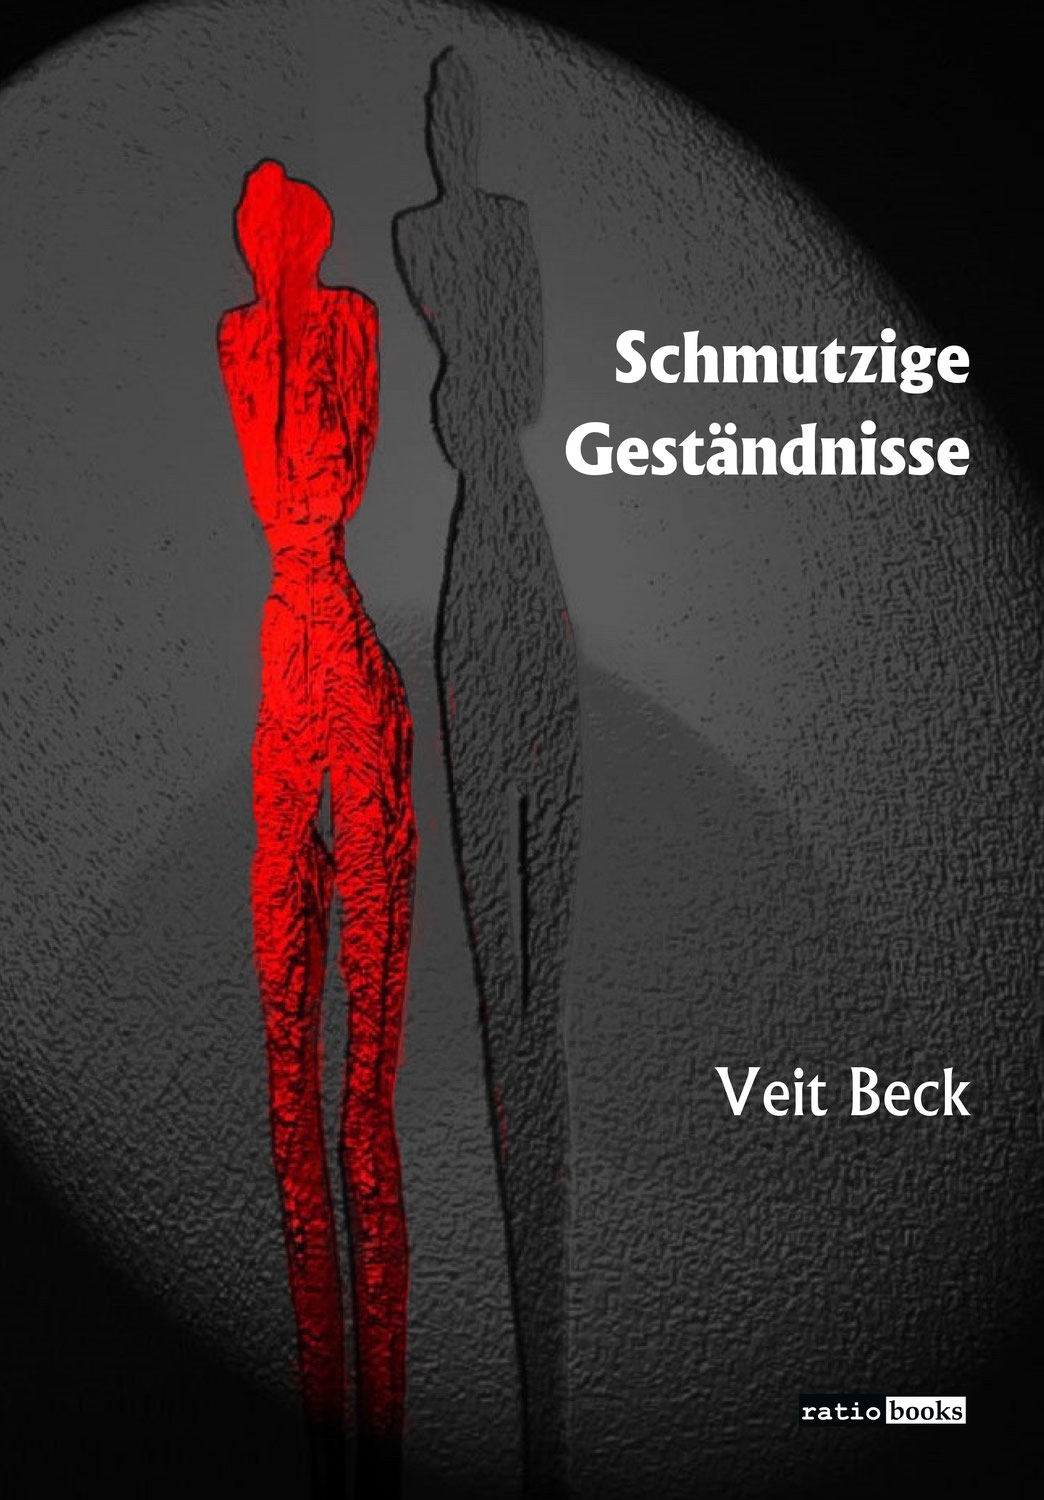 Neues Buch! Neues Thema in innovativer Form!